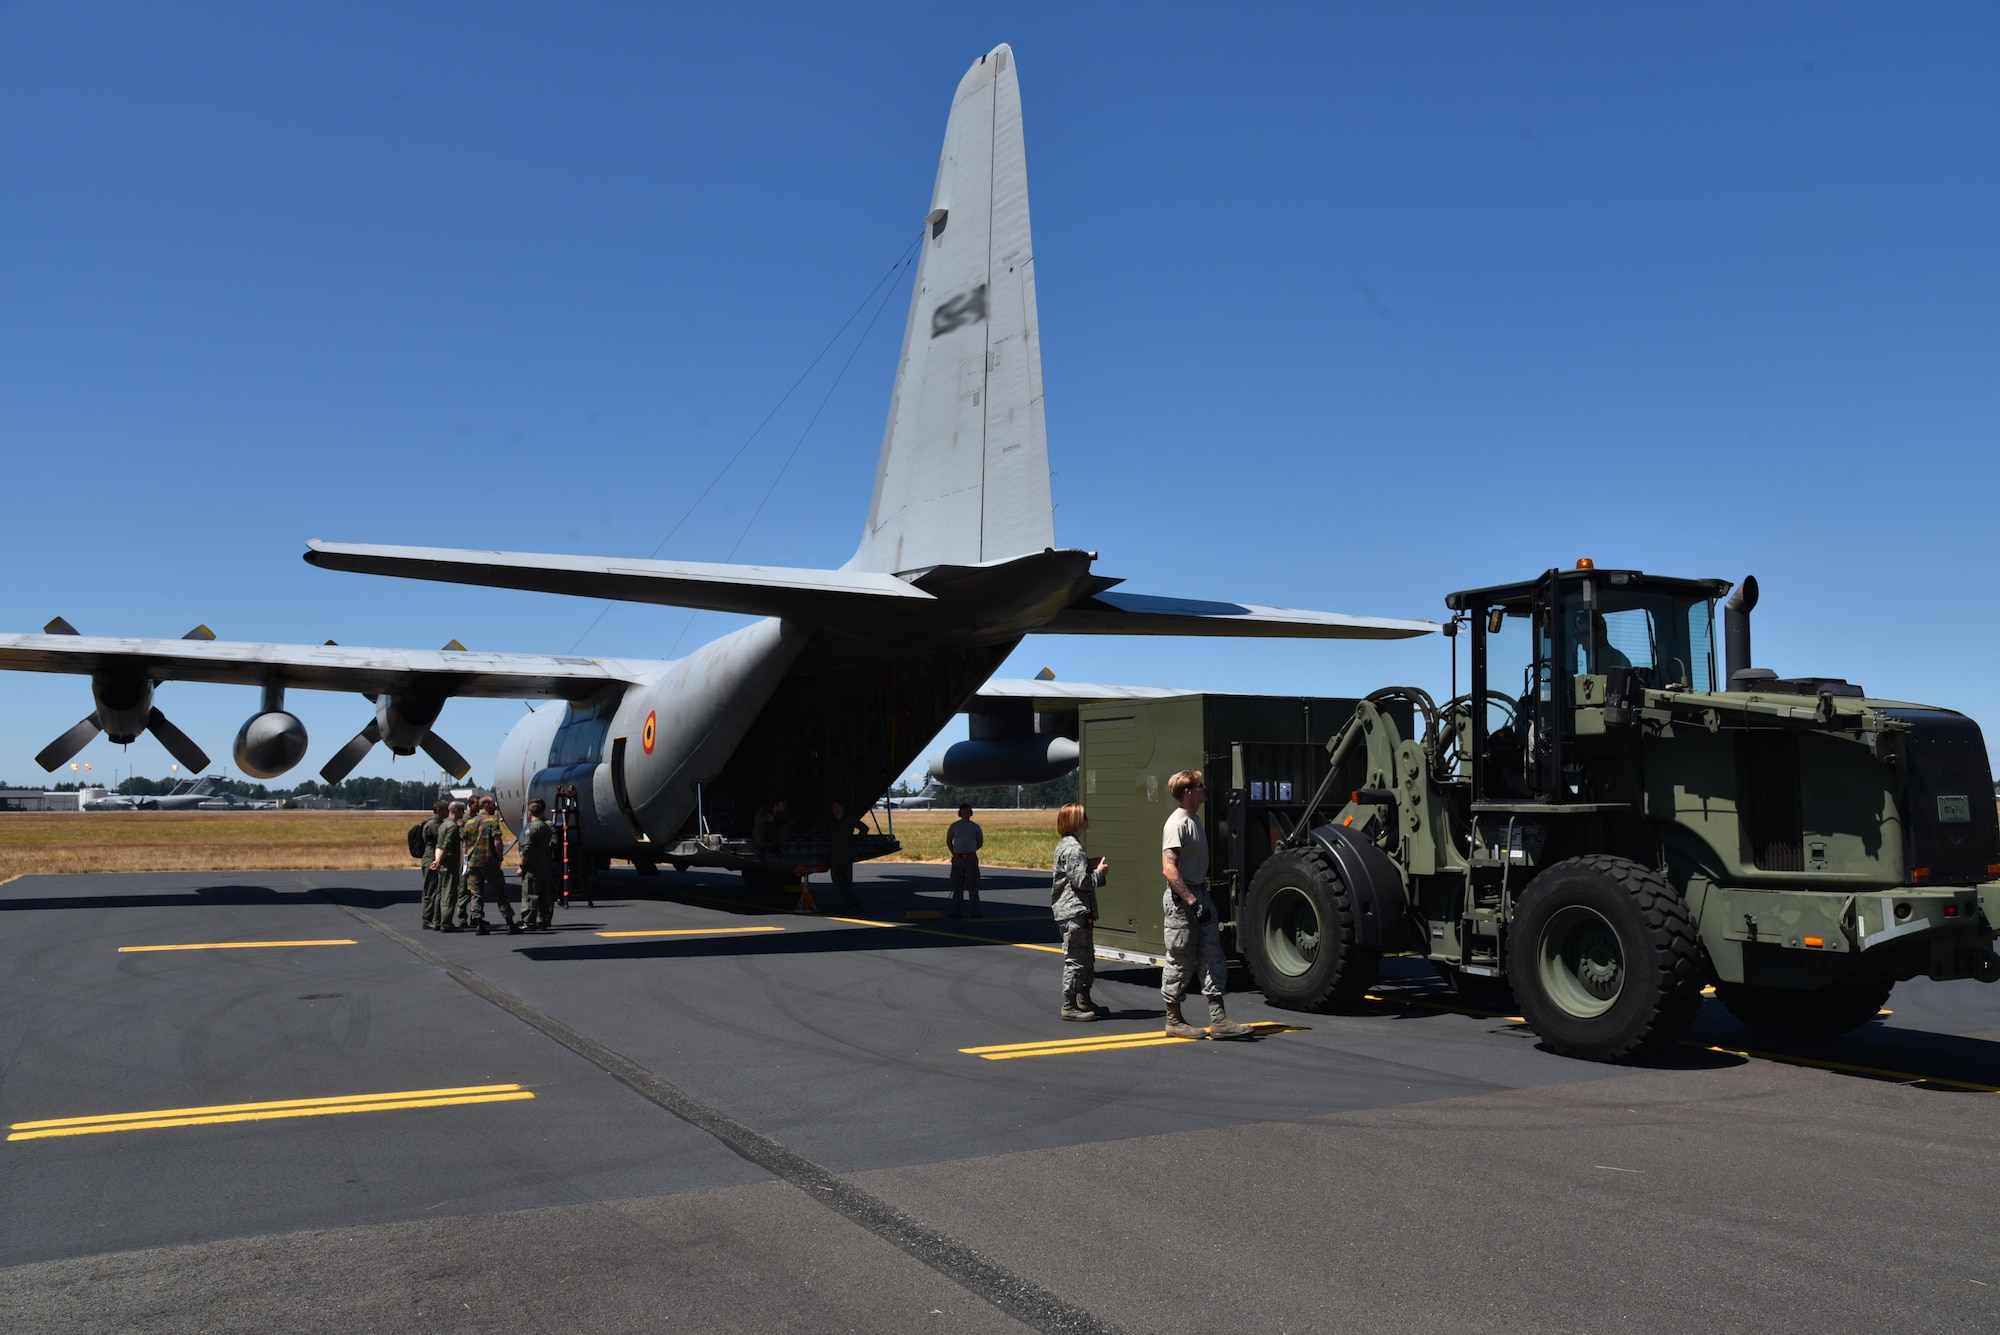 The 86th Aerial Port Squadron assists the Belgian Air Component 15th Air Transport Wing 20th Squadron with offloading cargo during their arrival to Mobility Guardian, Joint Base Lewis-McChord, Wash., July 28, 2017.  Mobility Guardian is Air Mobility Command's premier exercise, providing an opportunity for the Mobility Air Forces to train with joint and international partners in airlift, air refueling, aeromedical evacuation and mobility support. (U.S. Air Force photo manipulation by Staff Sgt. Jael Laborn)